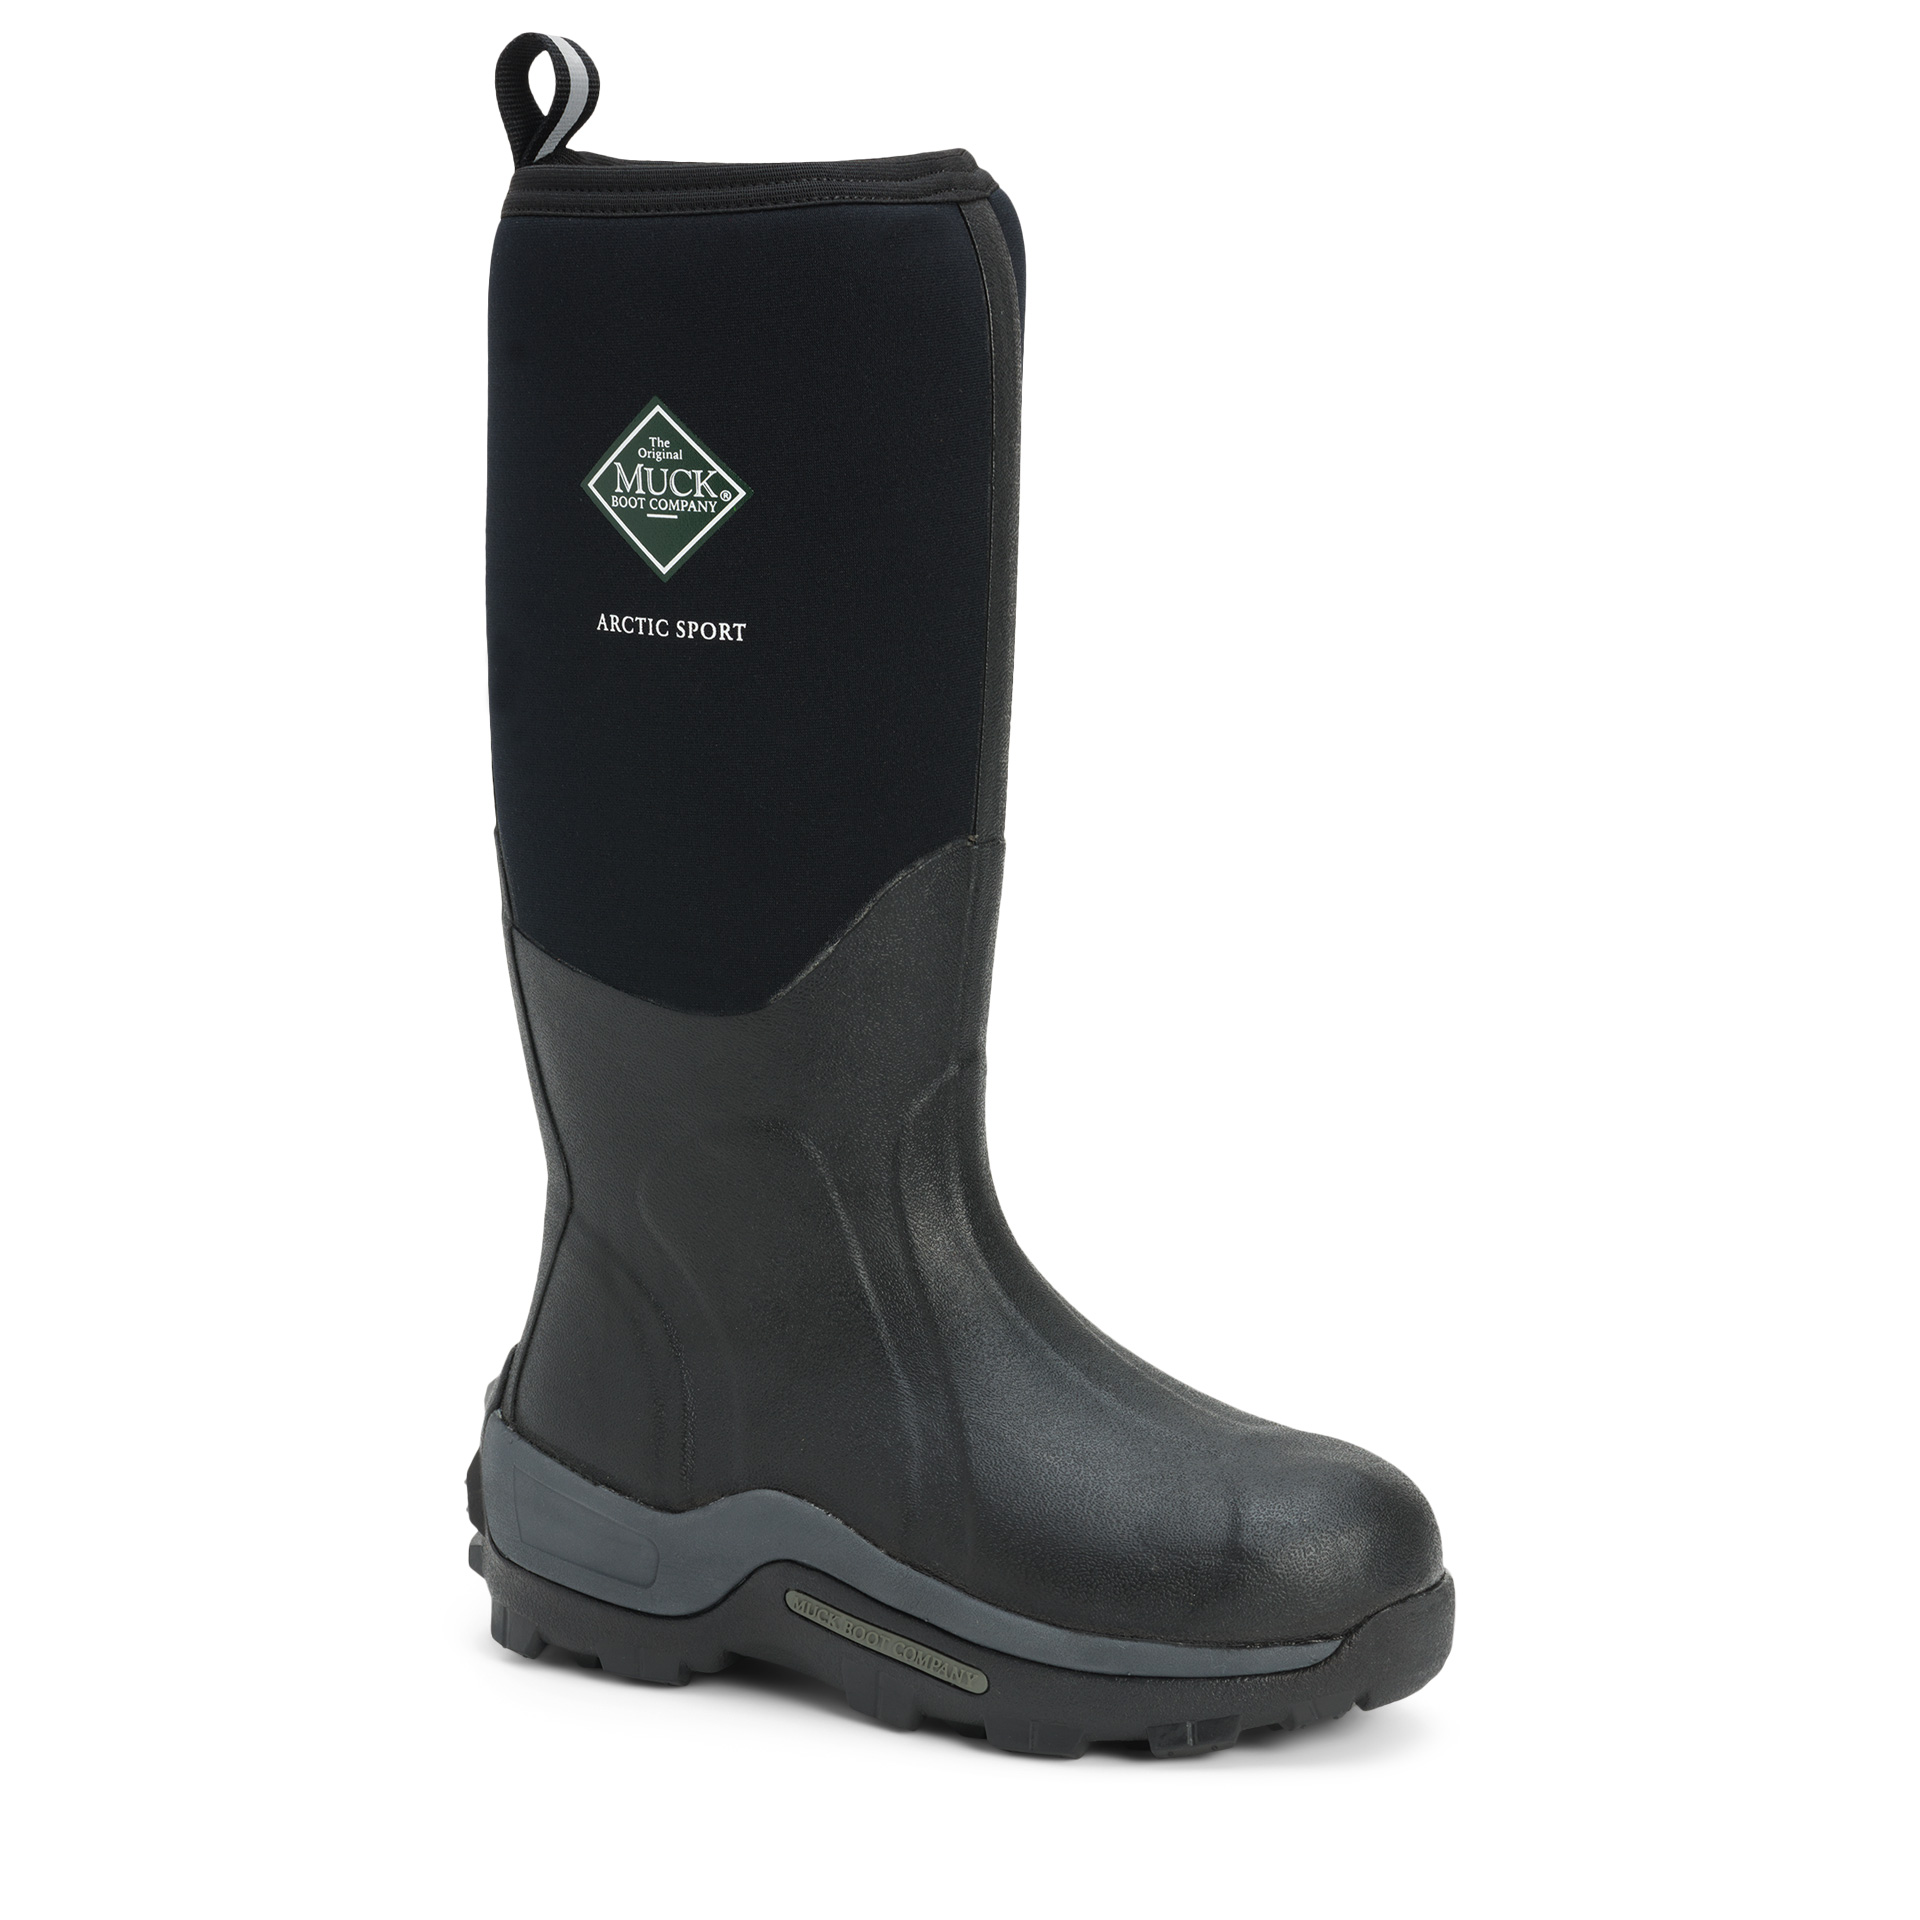 Muck Men's Arctic Sport Tall Rubber Work Boots from Columbia Safety